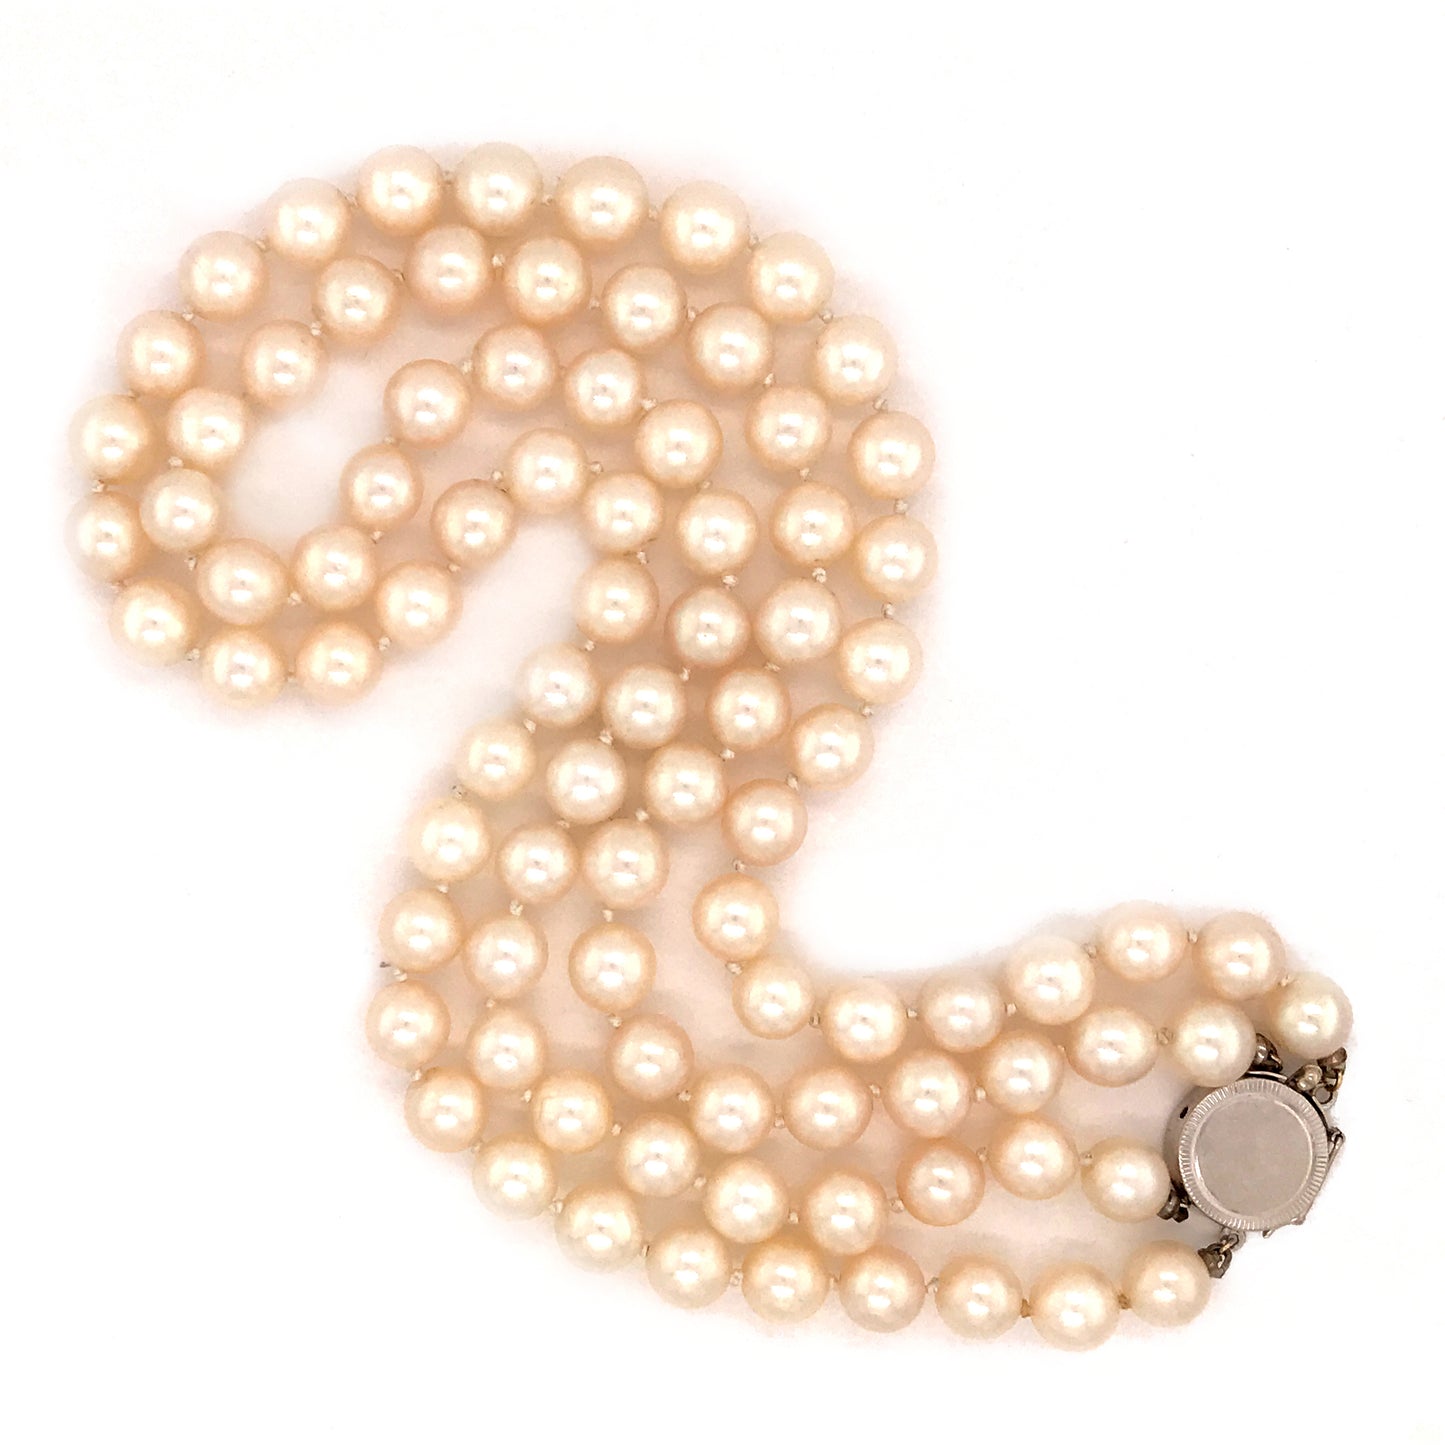 Classy Double Pearl Strand with 14k White Gold Clasp Necklace